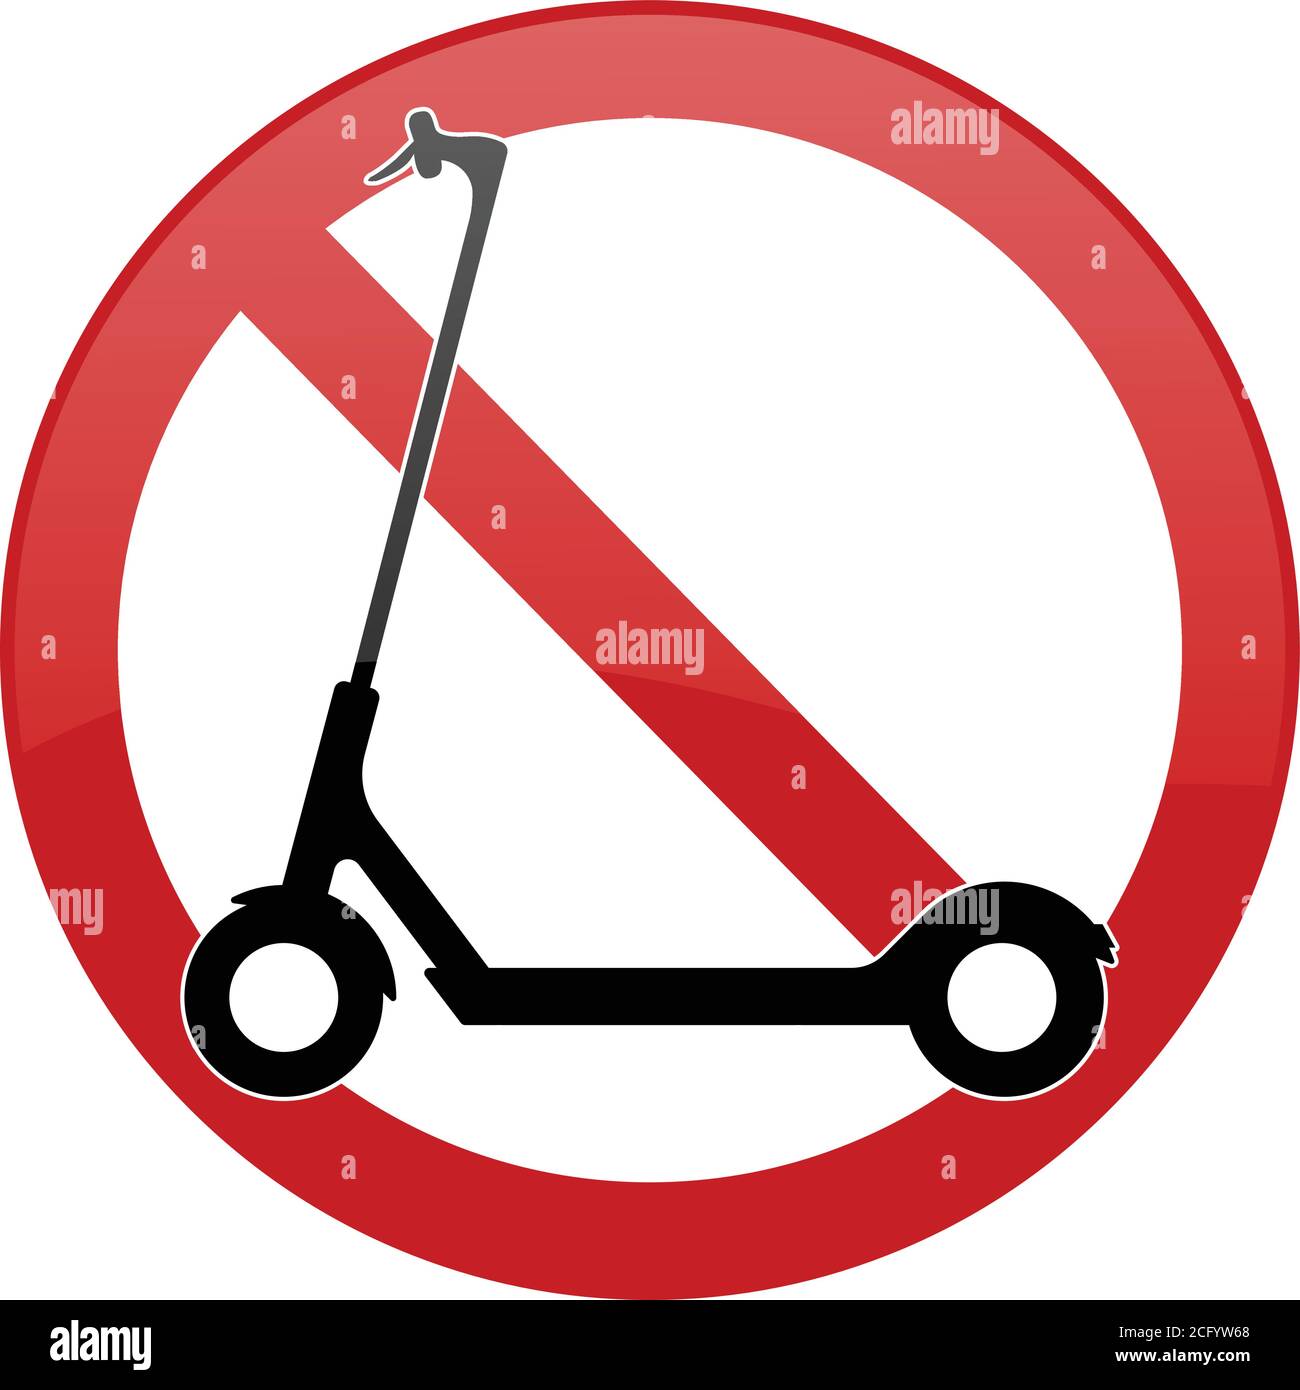 no electric scooters in this area sign - vector illustration Stock Vector